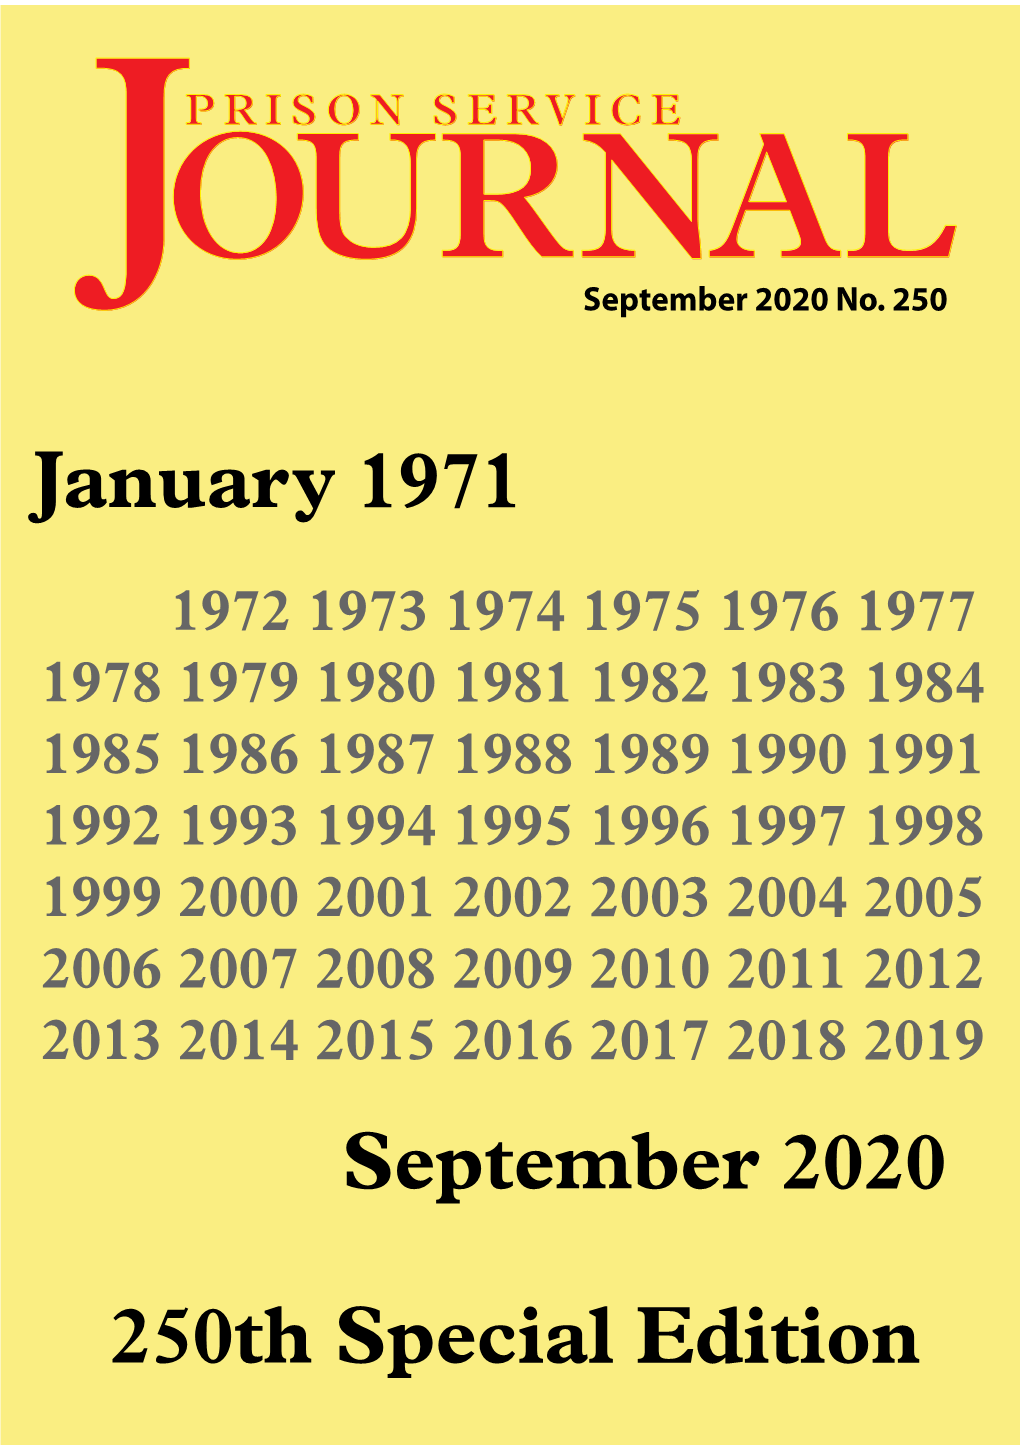 Prison Service Journal Is a Peer Reviewed Journal Published by HM Prison Service of England and Wales